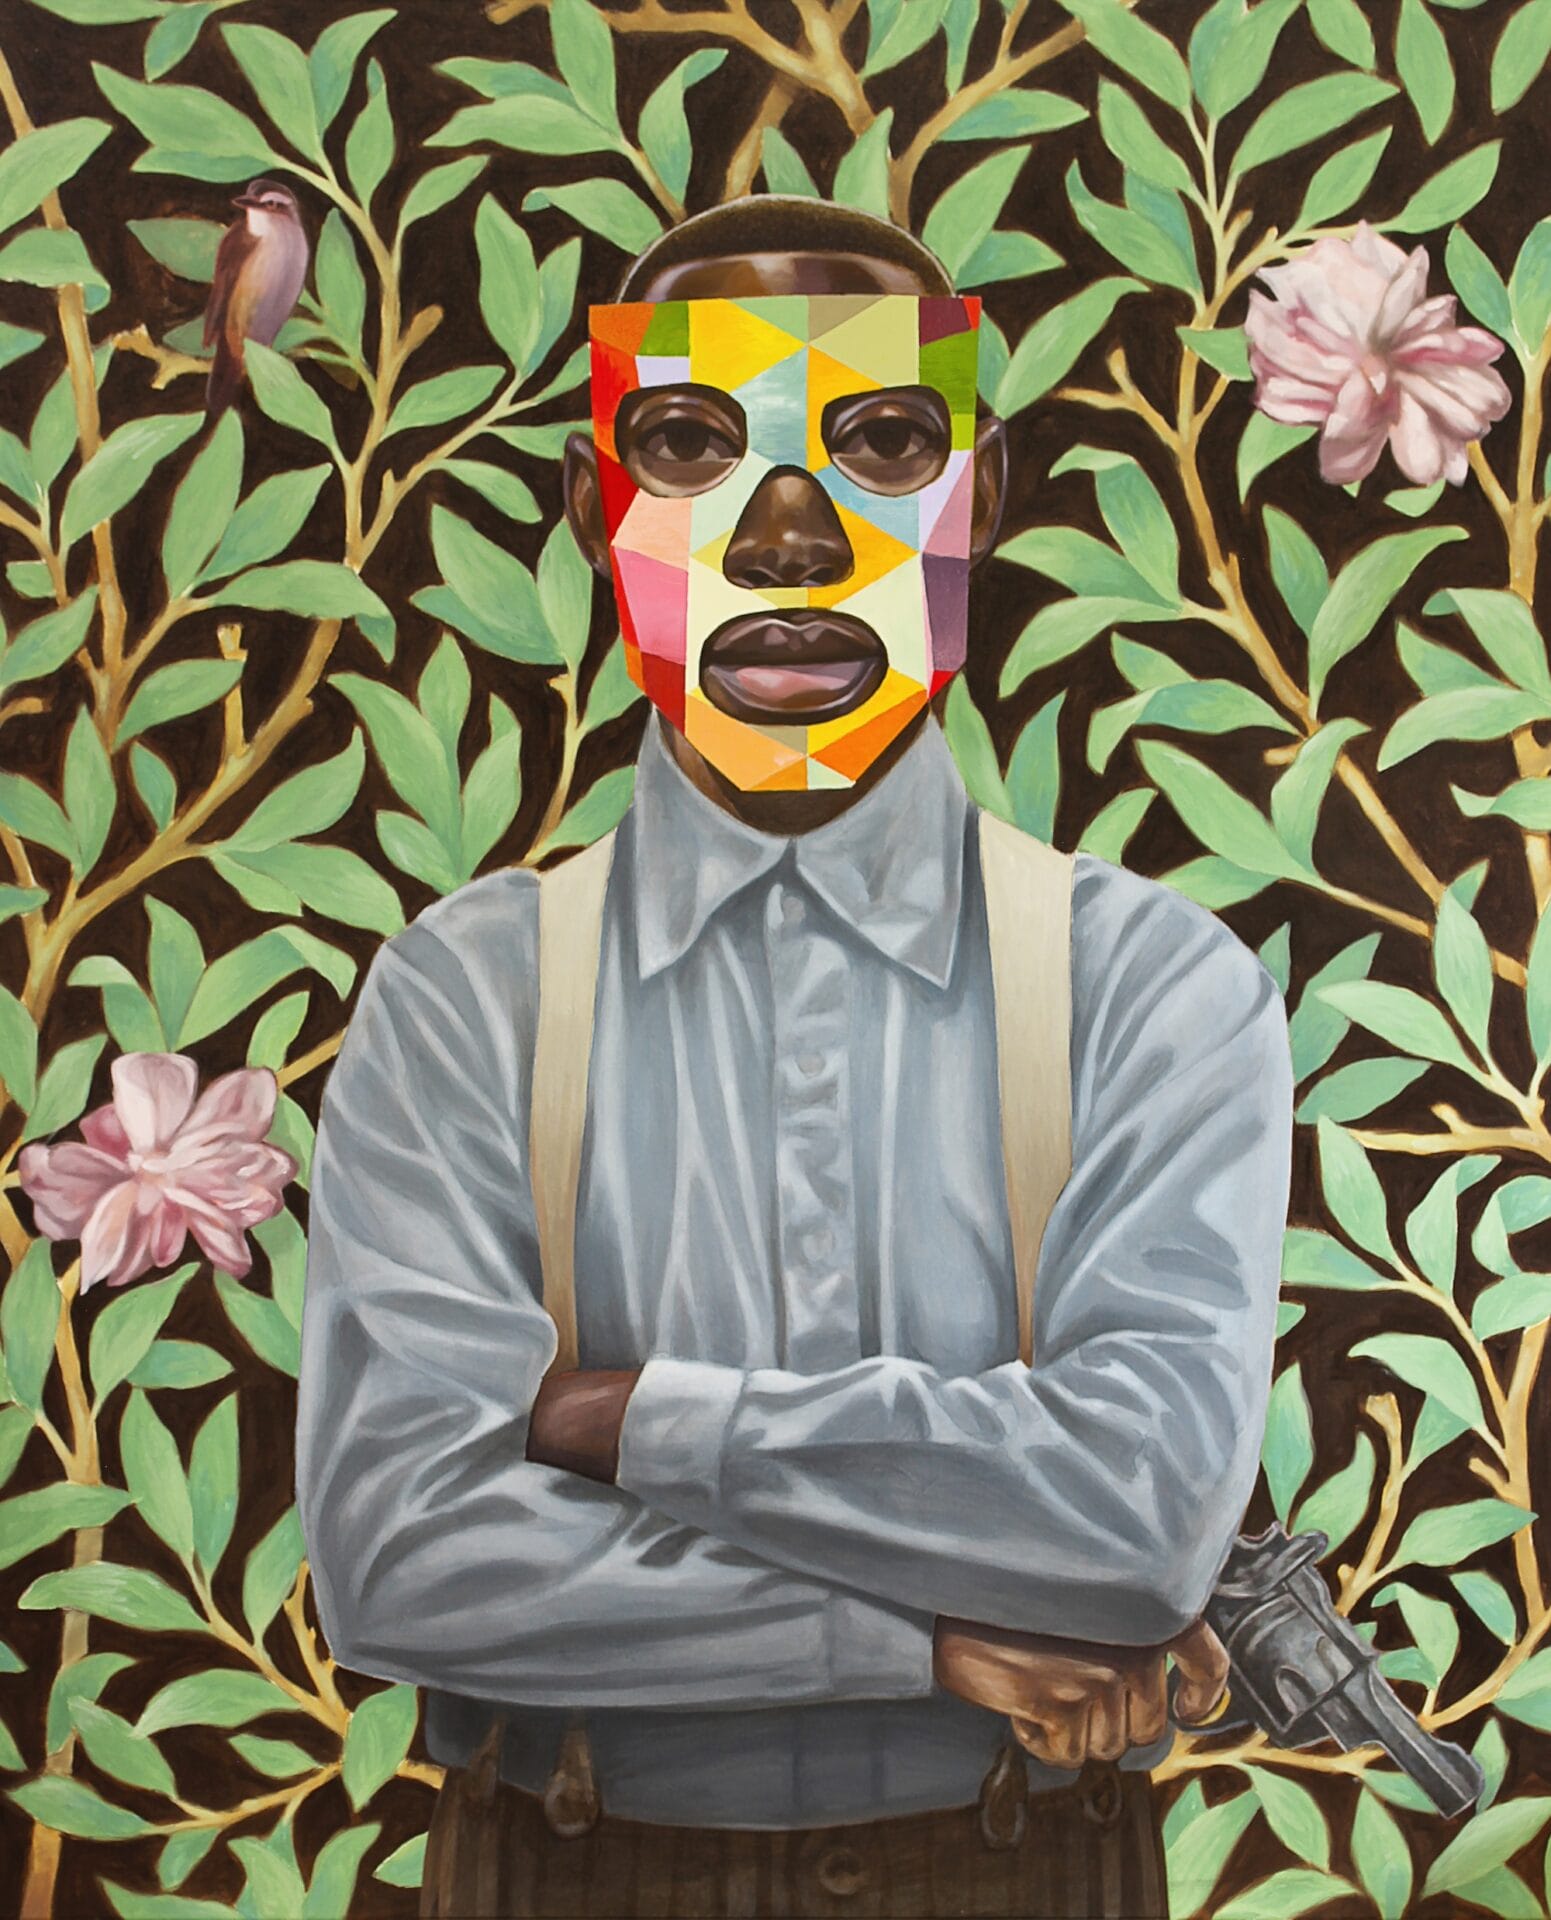 an oil painting of an imagined young black figure wearing a button down shirt and suspenders, in front of a foliage-patterned background nd holding a pistol, with his face covered in a geometrically patterned mask that reveals his eyes, nose, and mouth